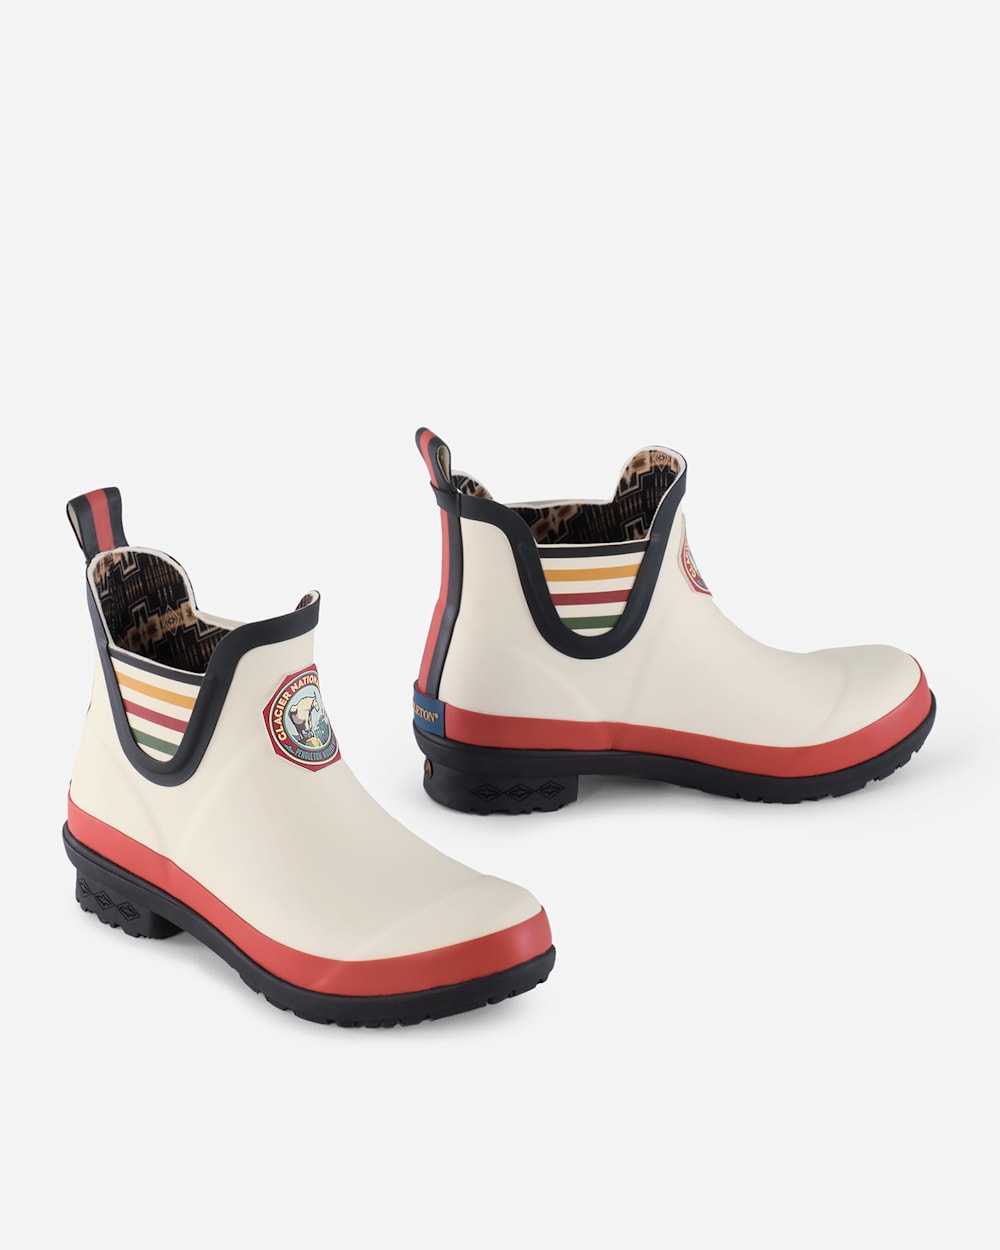 ALTERNATE VIEW OF NATIONAL PARK CHELSEA RAIN BOOTS IN GLACIER PARK WHITE image number 2